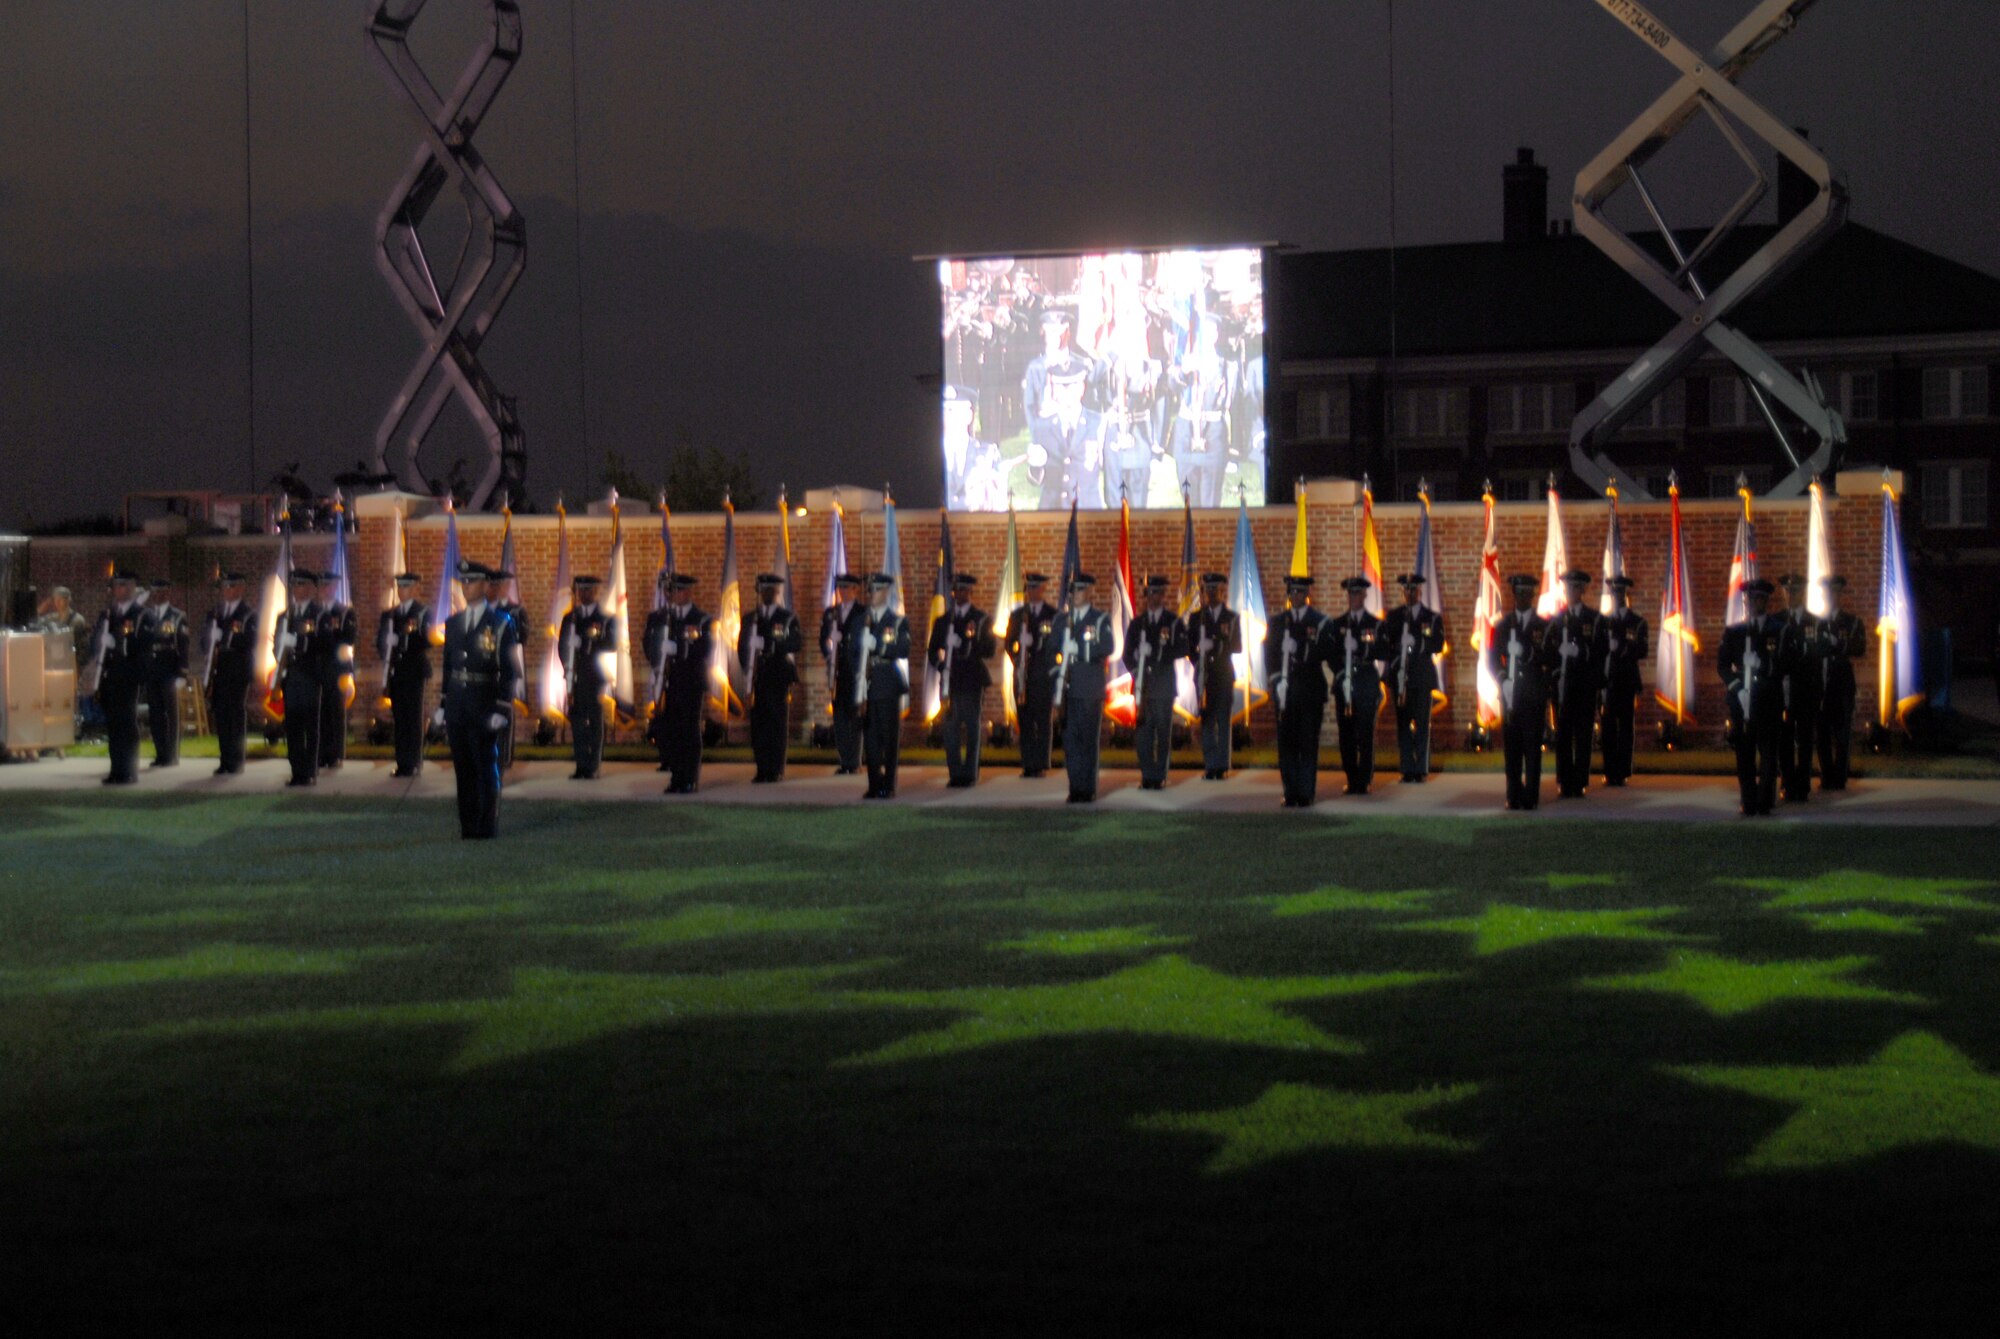 BOLLING AFB, D.C. -- Airmen from the Air Force Honor Guard stand ready in formation before performing marching orders and rifle manuals at the 60th Anniversary Air Force Tattoo dress rehearsal Sept. 22.
The military tattoo, which is held annually at Bolling, highlights troop excellence and readiness.  The tattoo dates back to the mid-17th century British Army deployment to the Netherlands in which drummers were sent from the garrison to the towns at 9:30 each night to let soldiers know it was time to return to the fort.
(U.S. Air Force photo by Staff Sgt. Madelyn Waychoff)